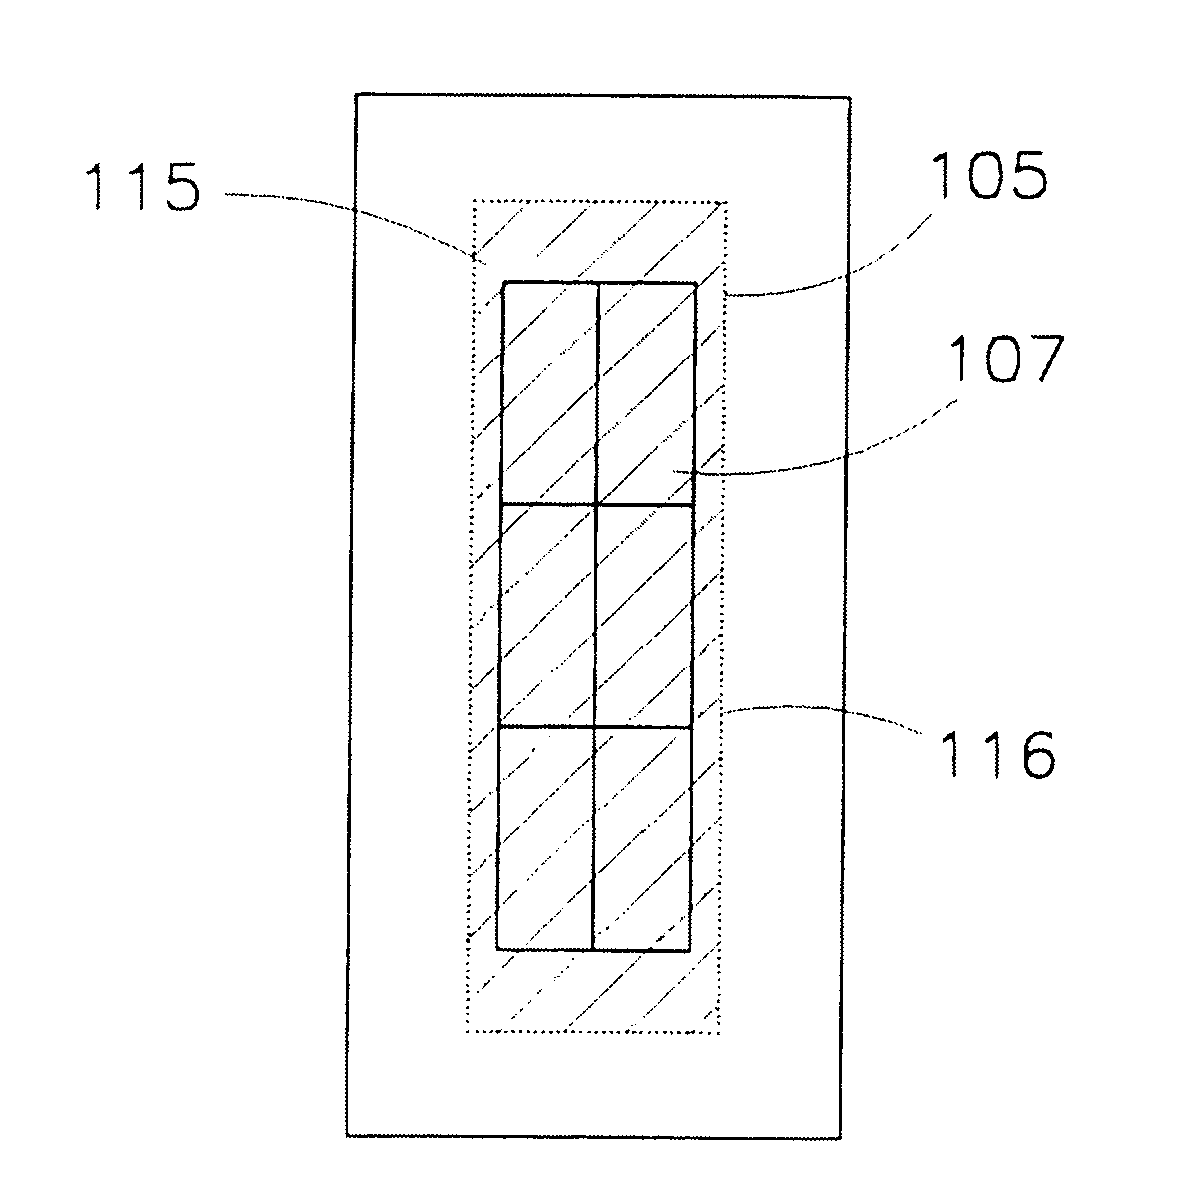 Lithographic apparatus, device manufacturing method, and slide assembly